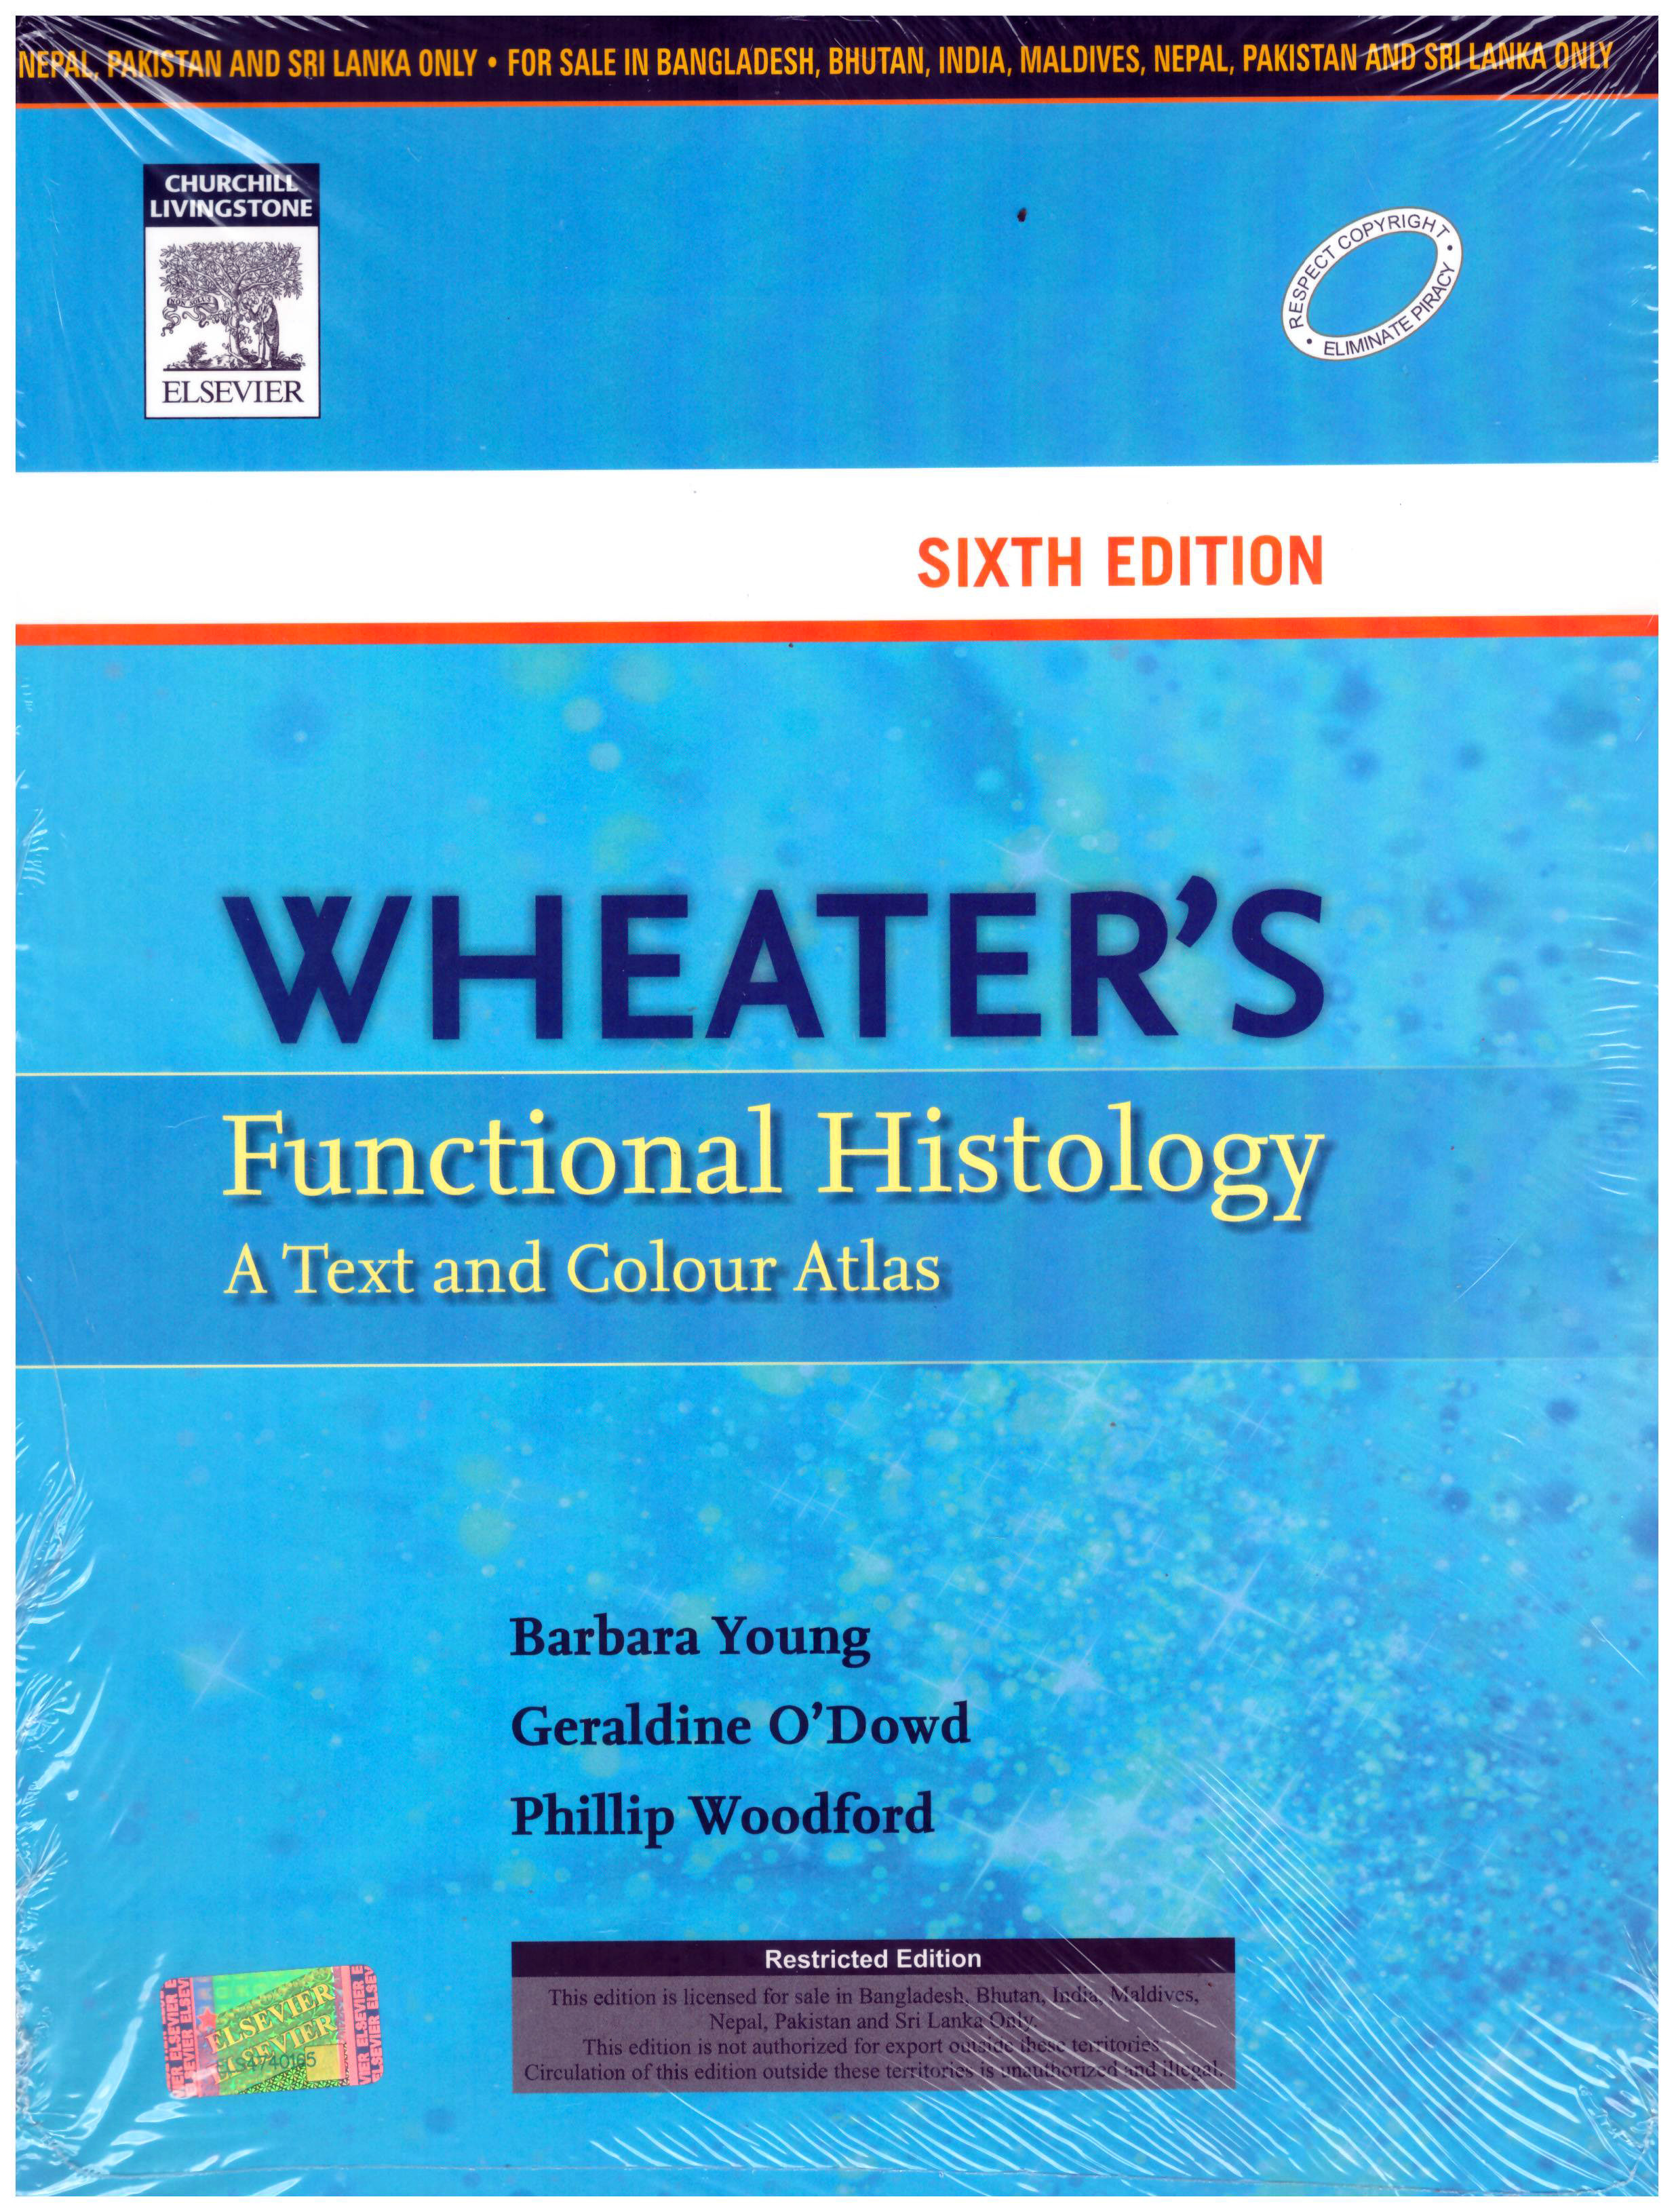 Wheaters Functional Histology A Text and Colour Atlas